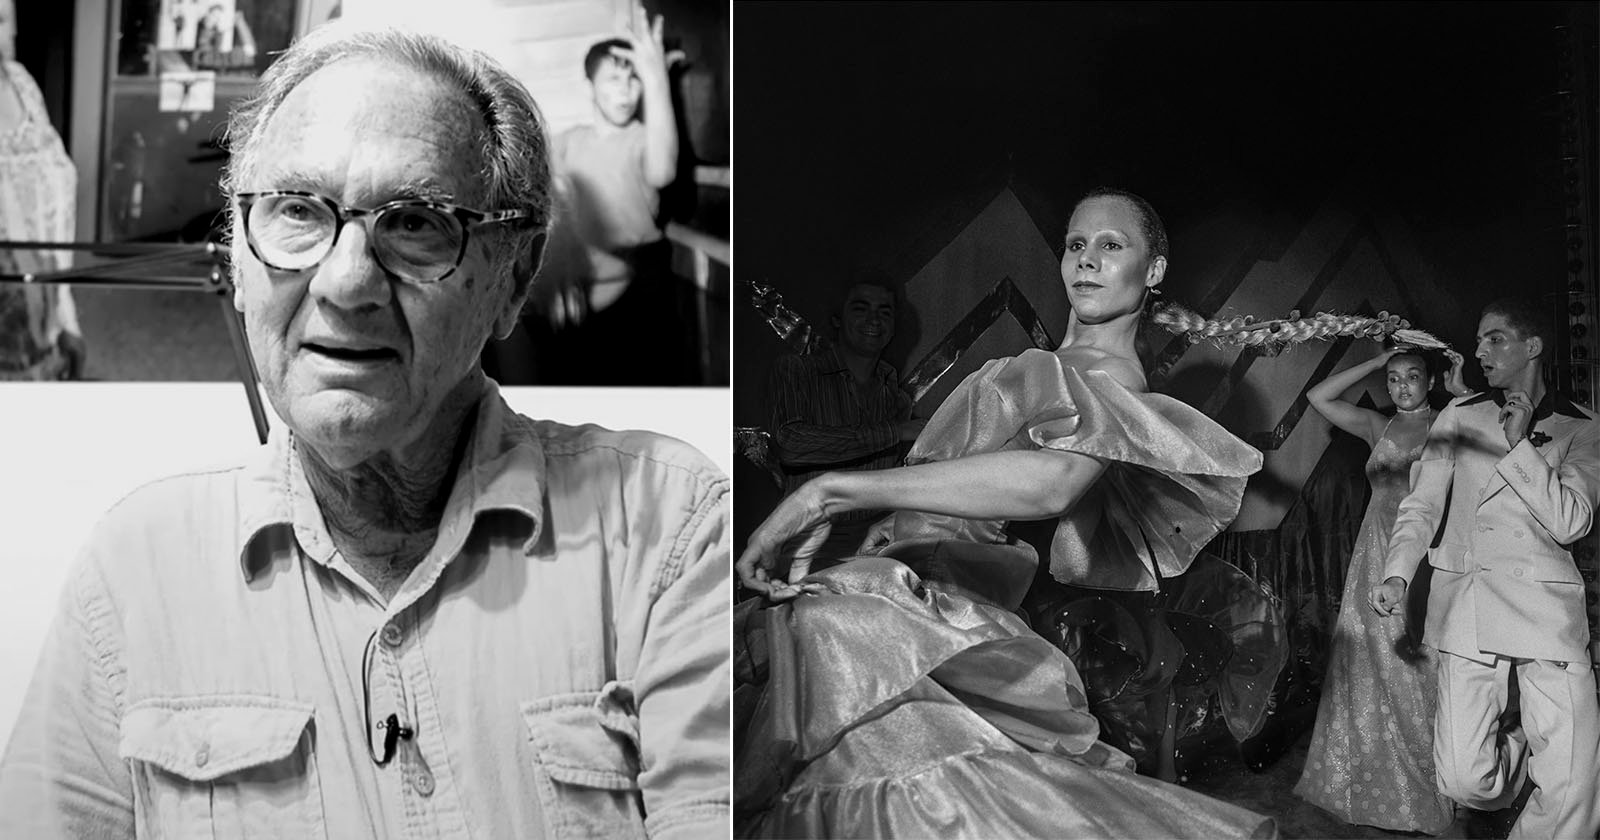  influential compassionate photographer larry fink has died 